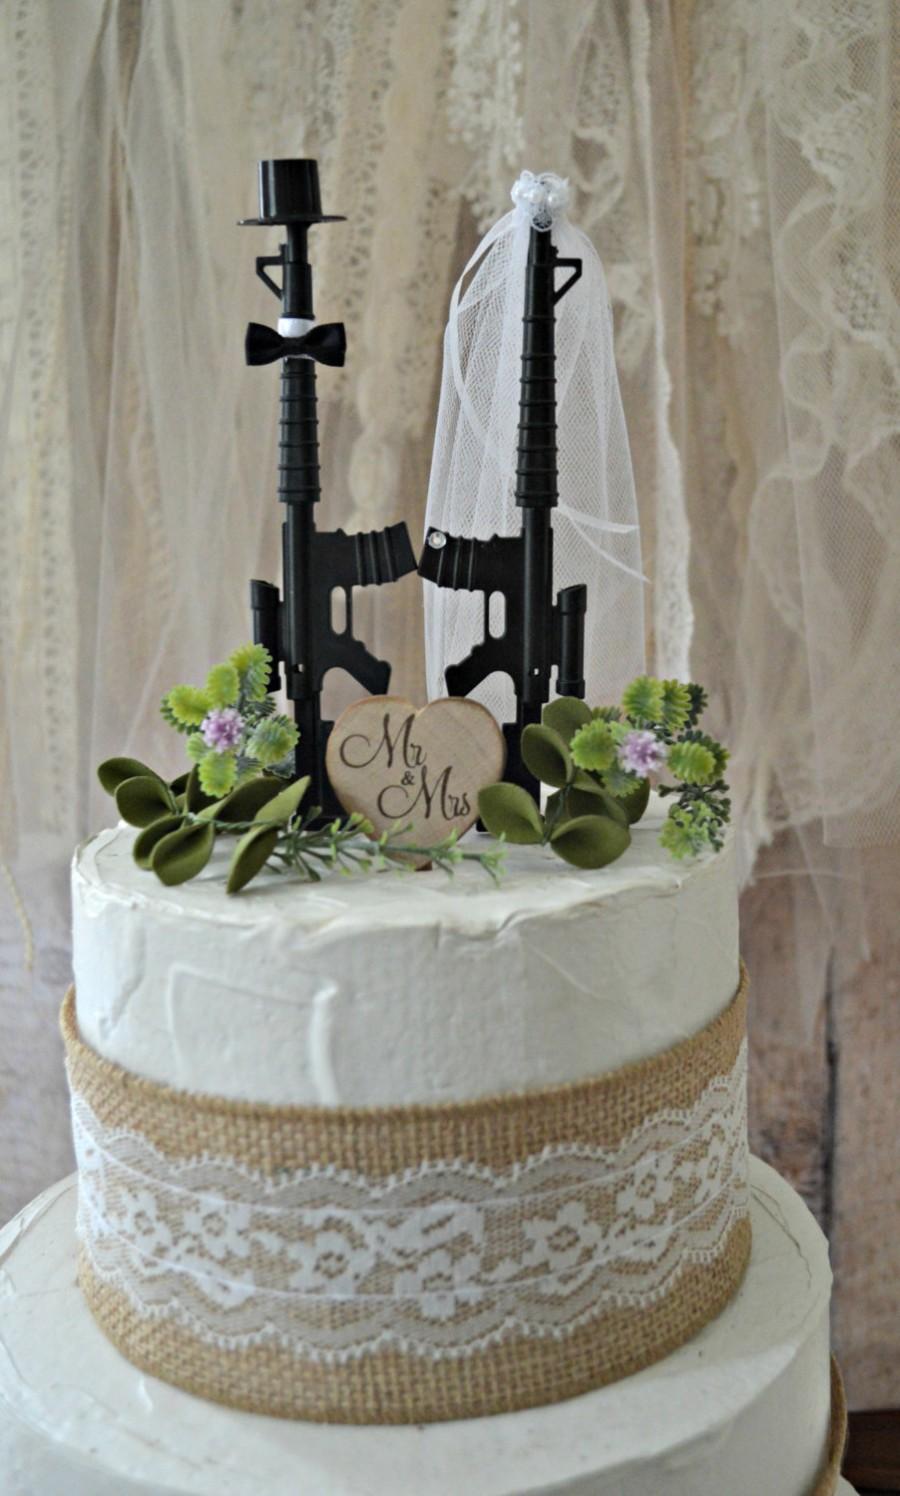 Mariage - Machine gun weapon wedding cake topper army police themed hunting groom's cake Mr & Mrs sing the hunt is over gun decorations military sign